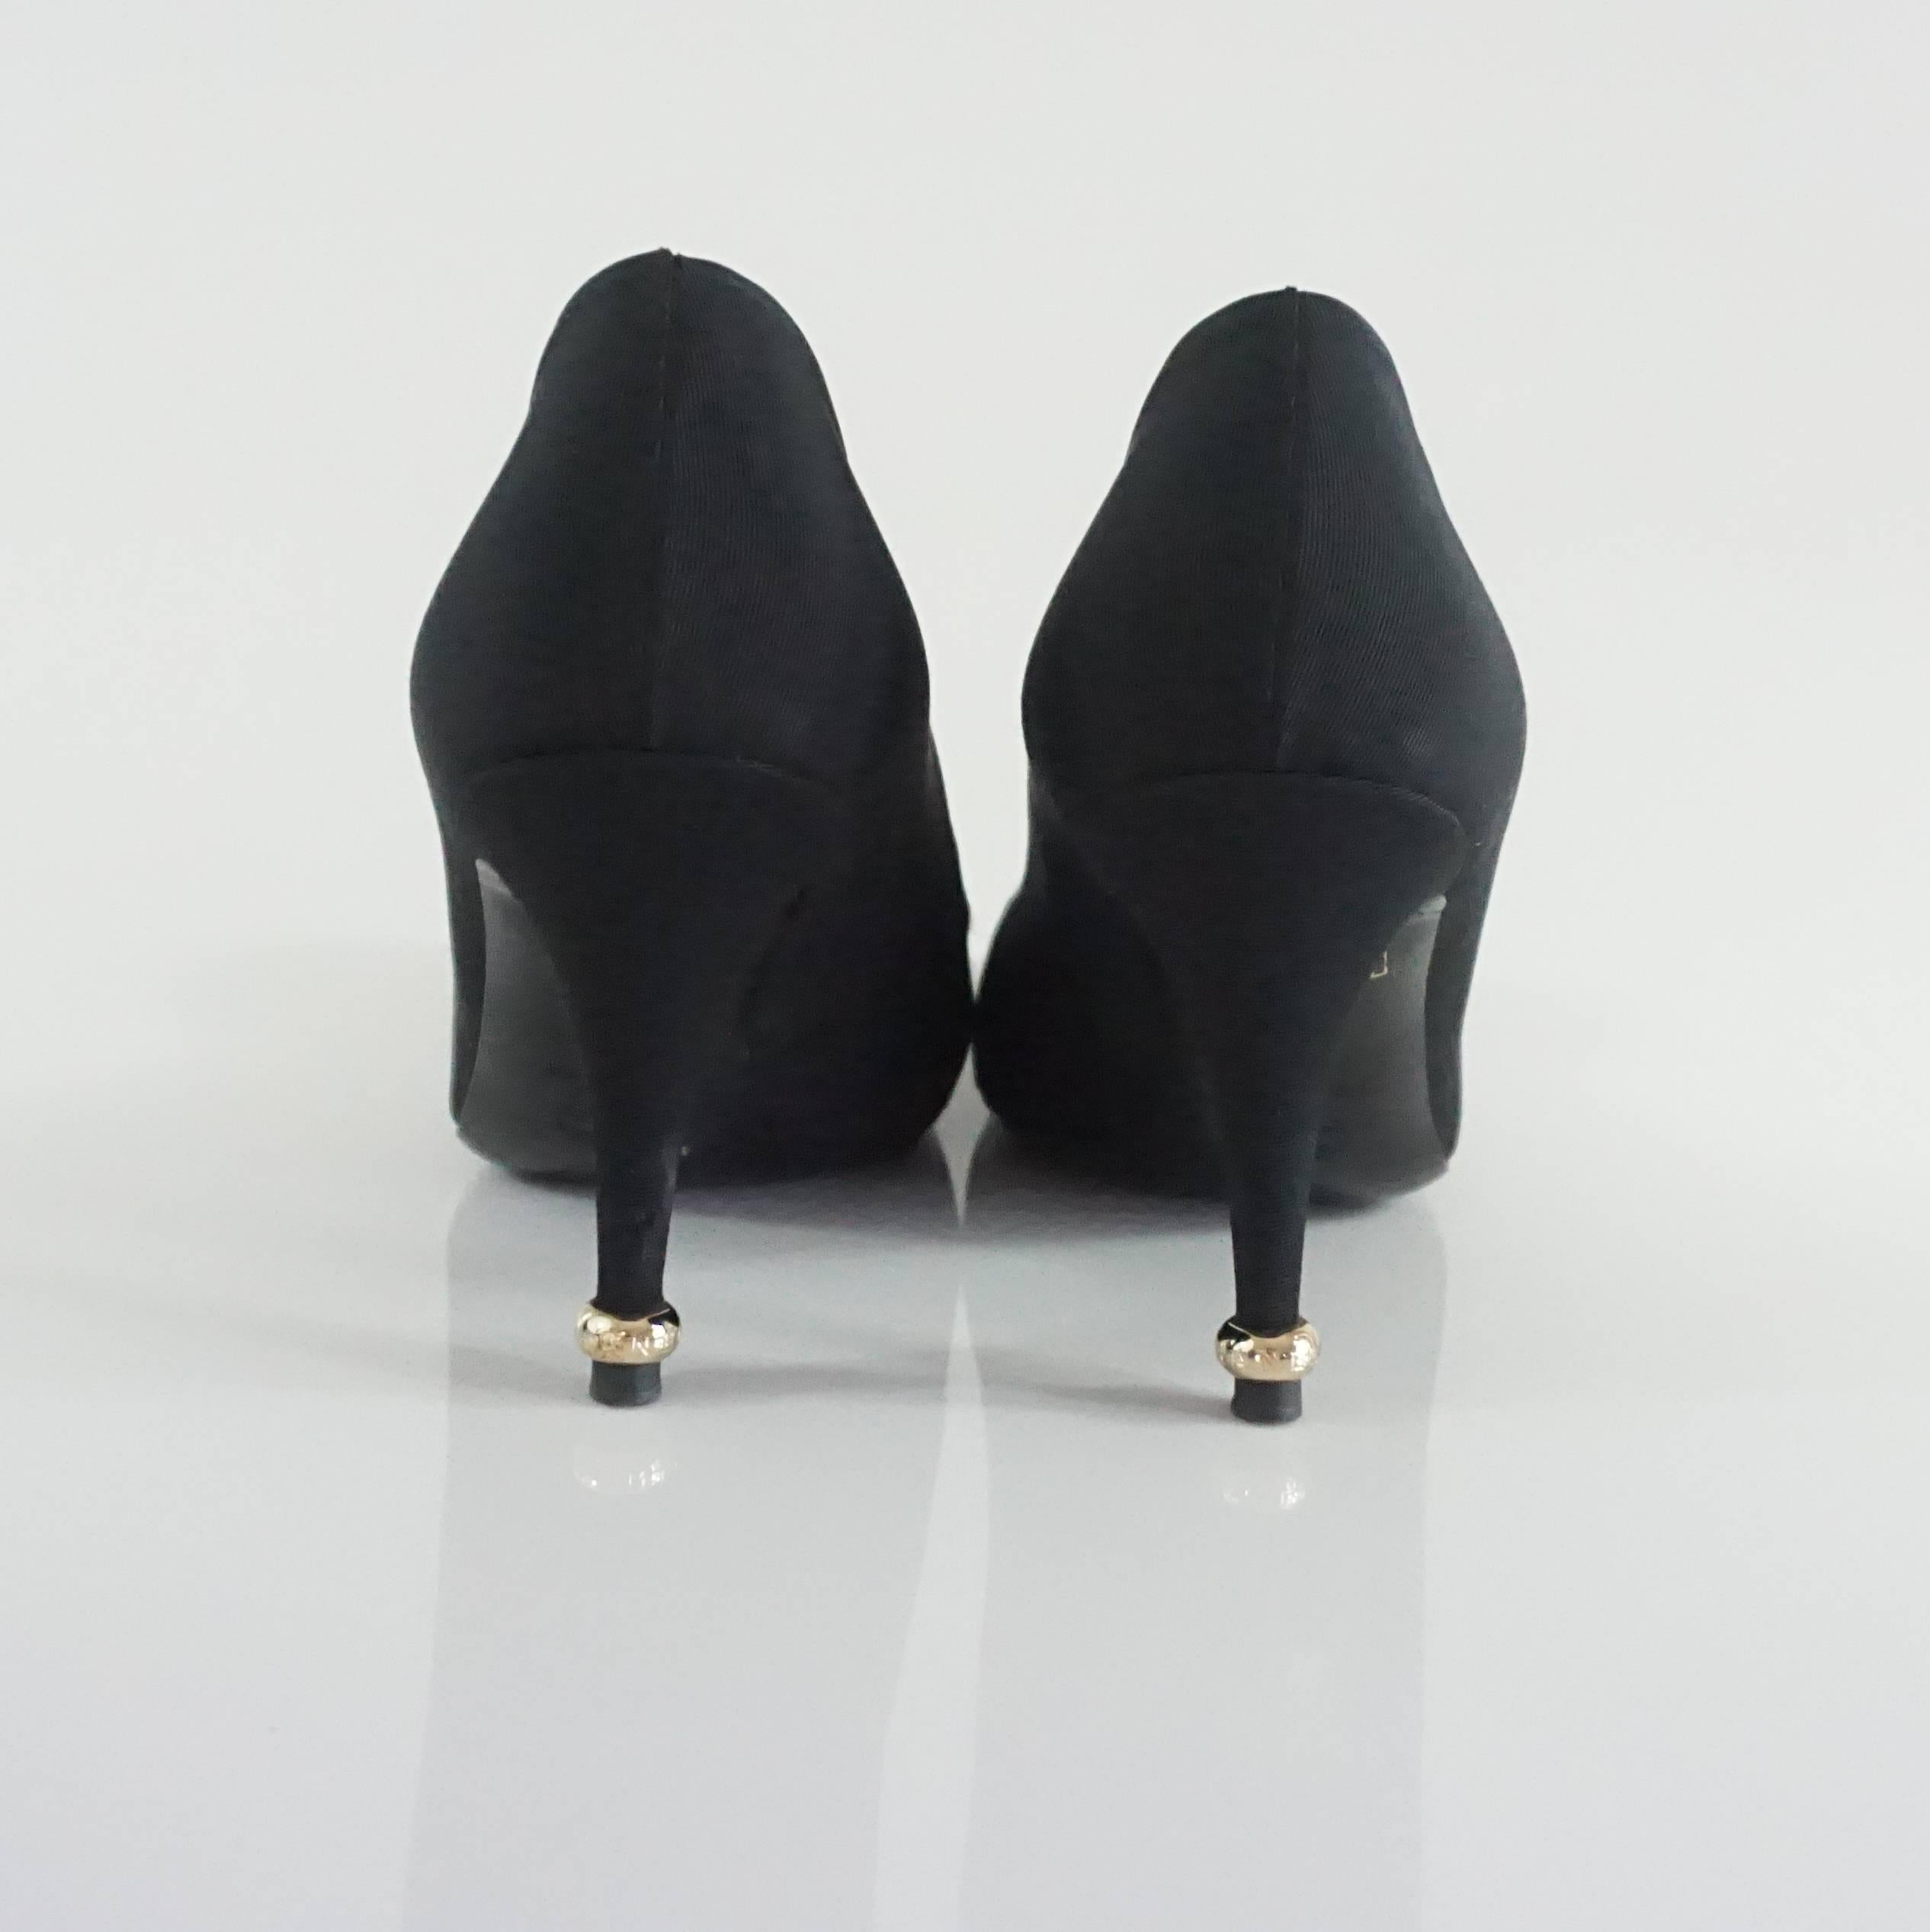 Women's Chanel Black Grosgrain Pumps with Ivory Silk Camellia - 37